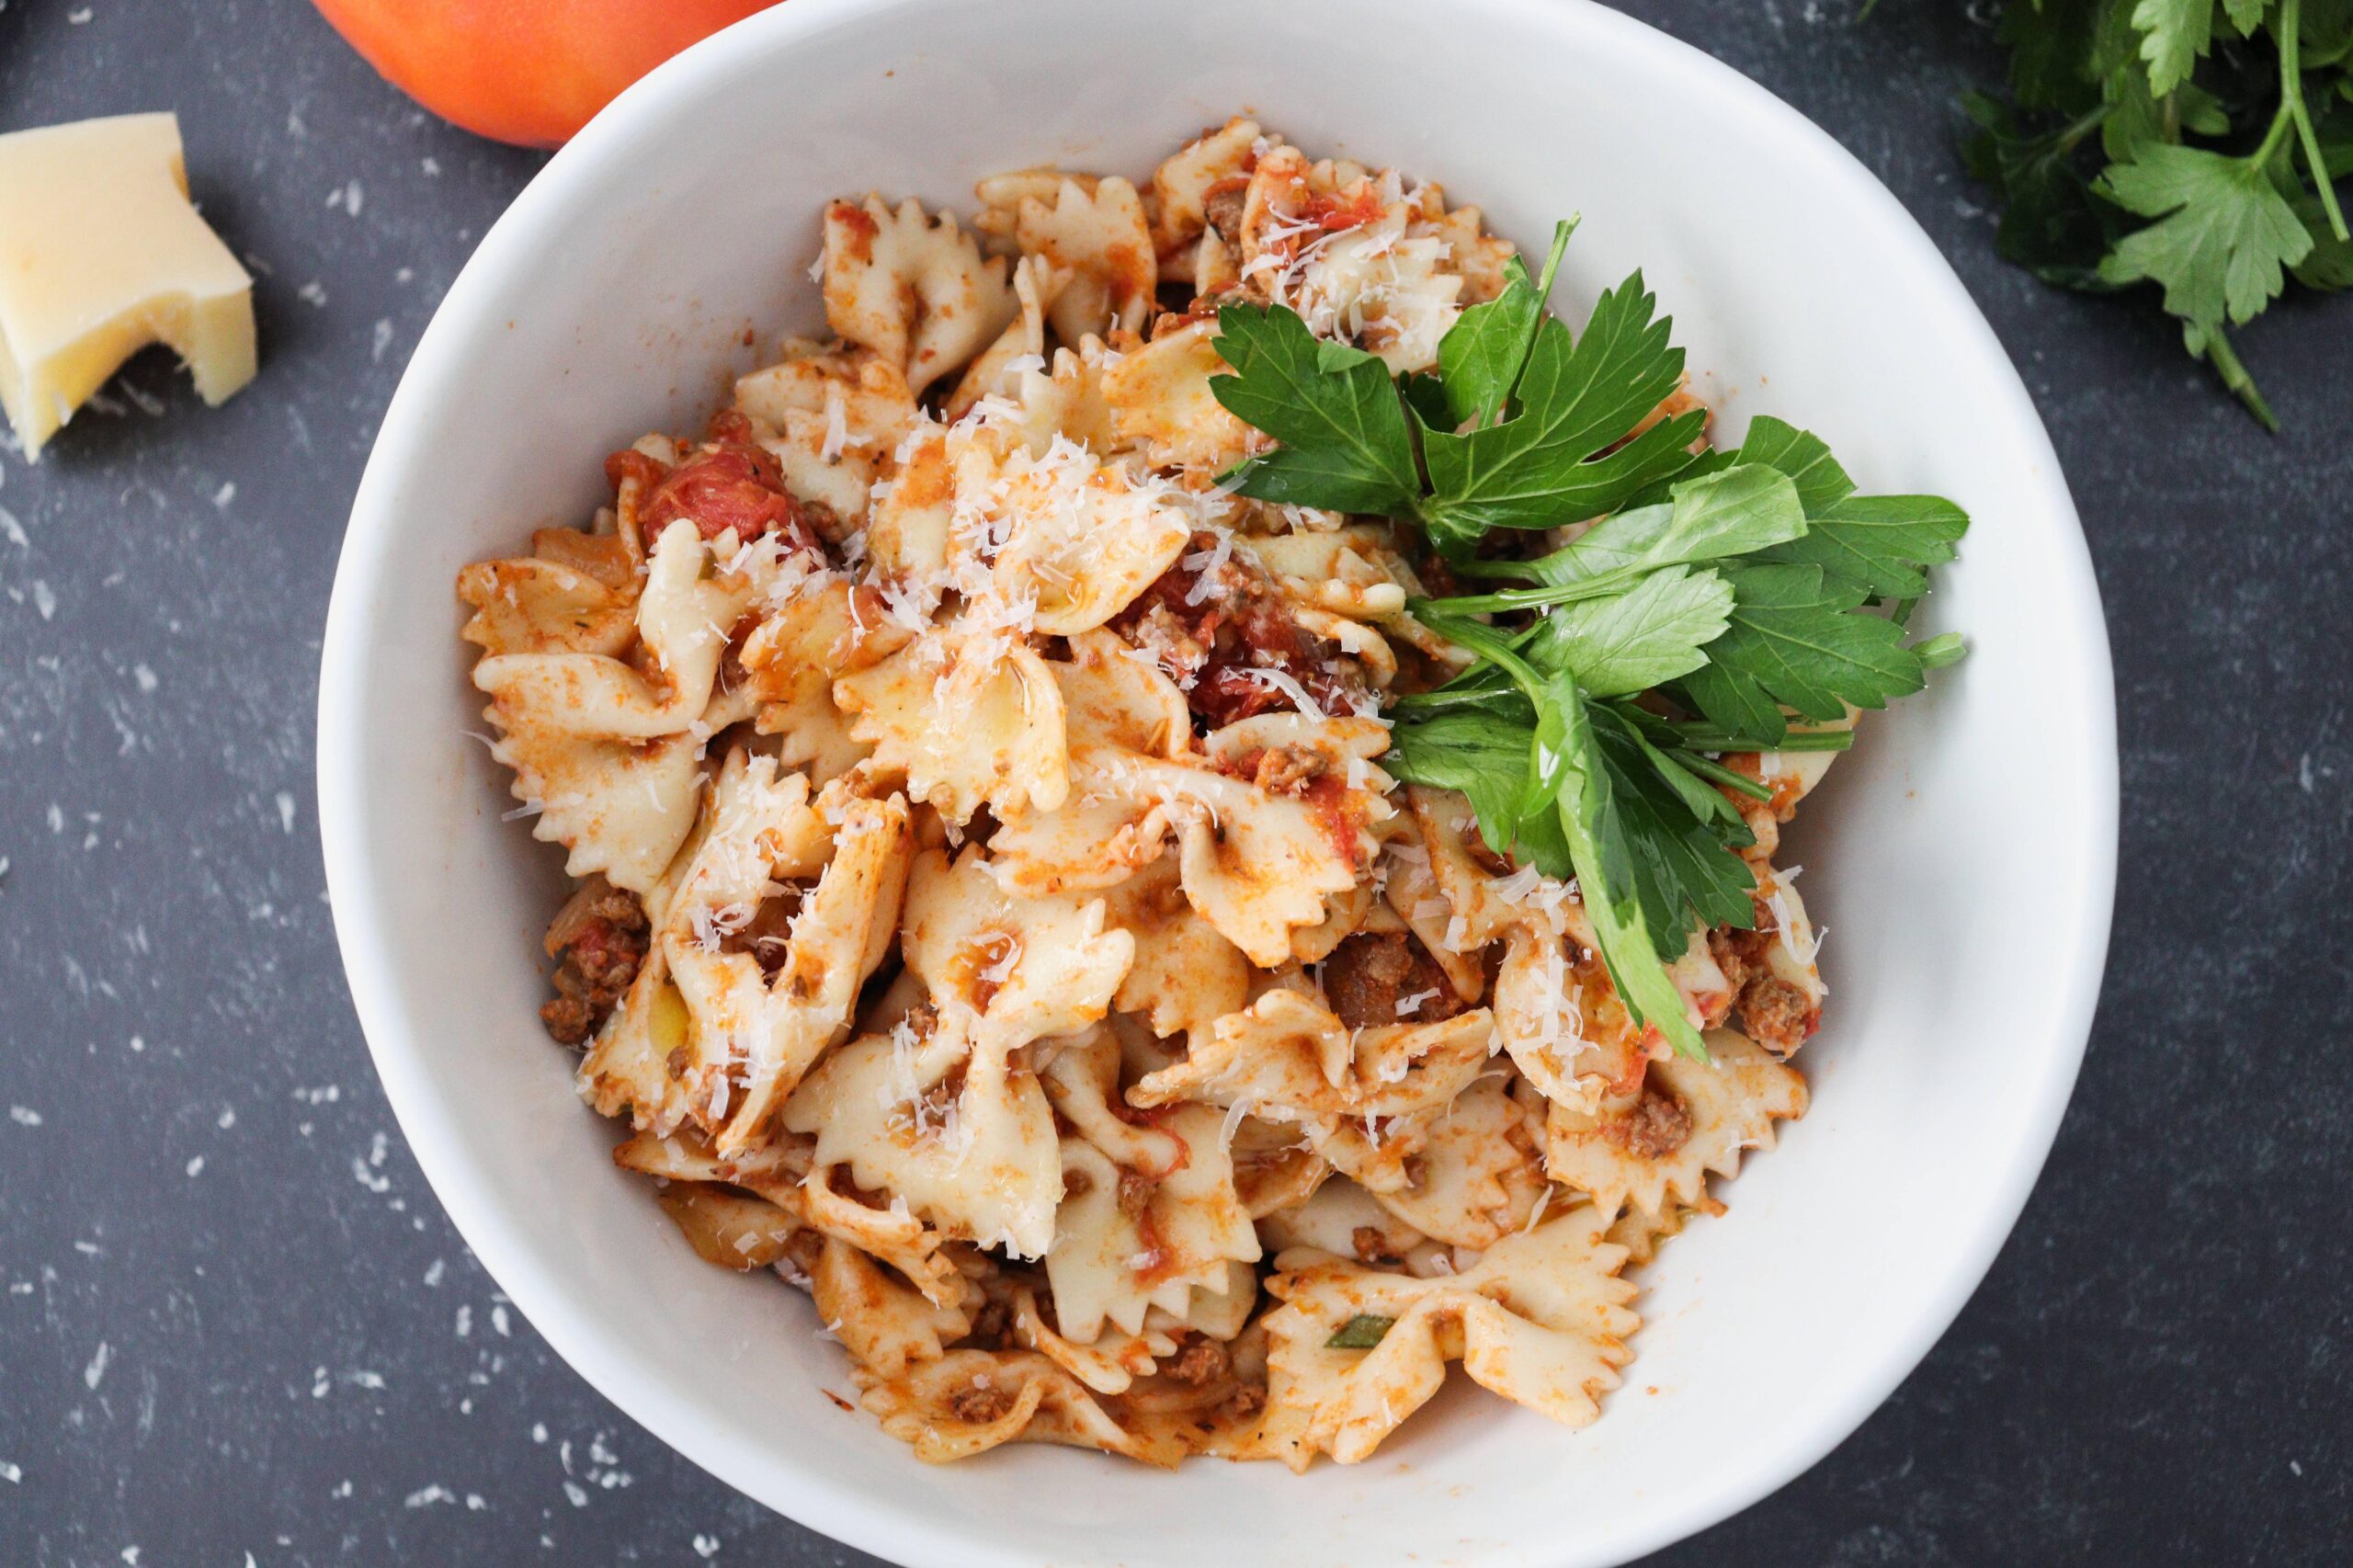  The Instant Pot makes cooking this pasta recipe a breeze - and cleanup even easier!